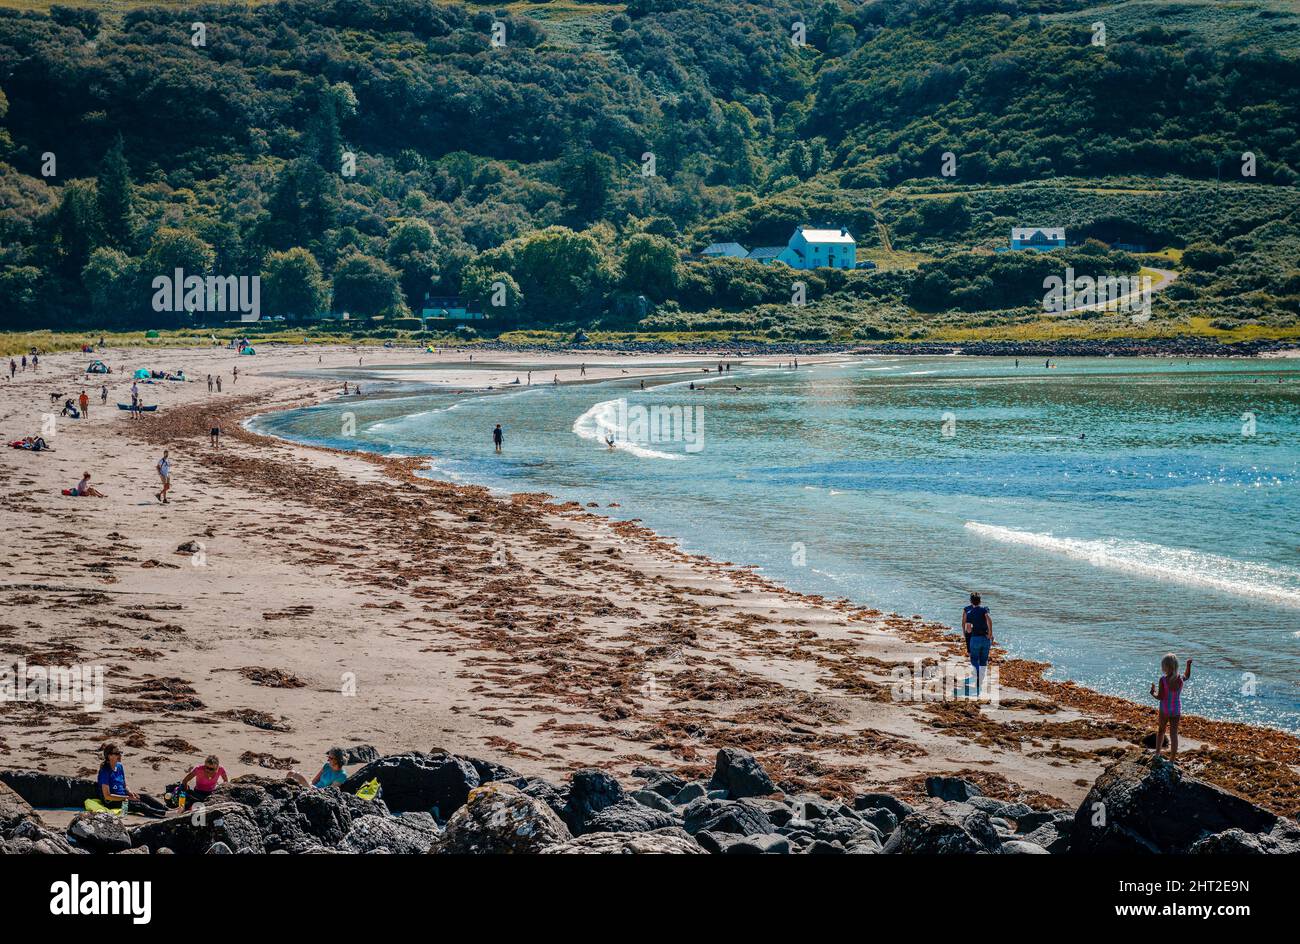 Calgary, UK - August 25 2019: View of the beach of the hamlet, in the Isle of Mull, Inner Hebrides, Scotland. Stock Photo